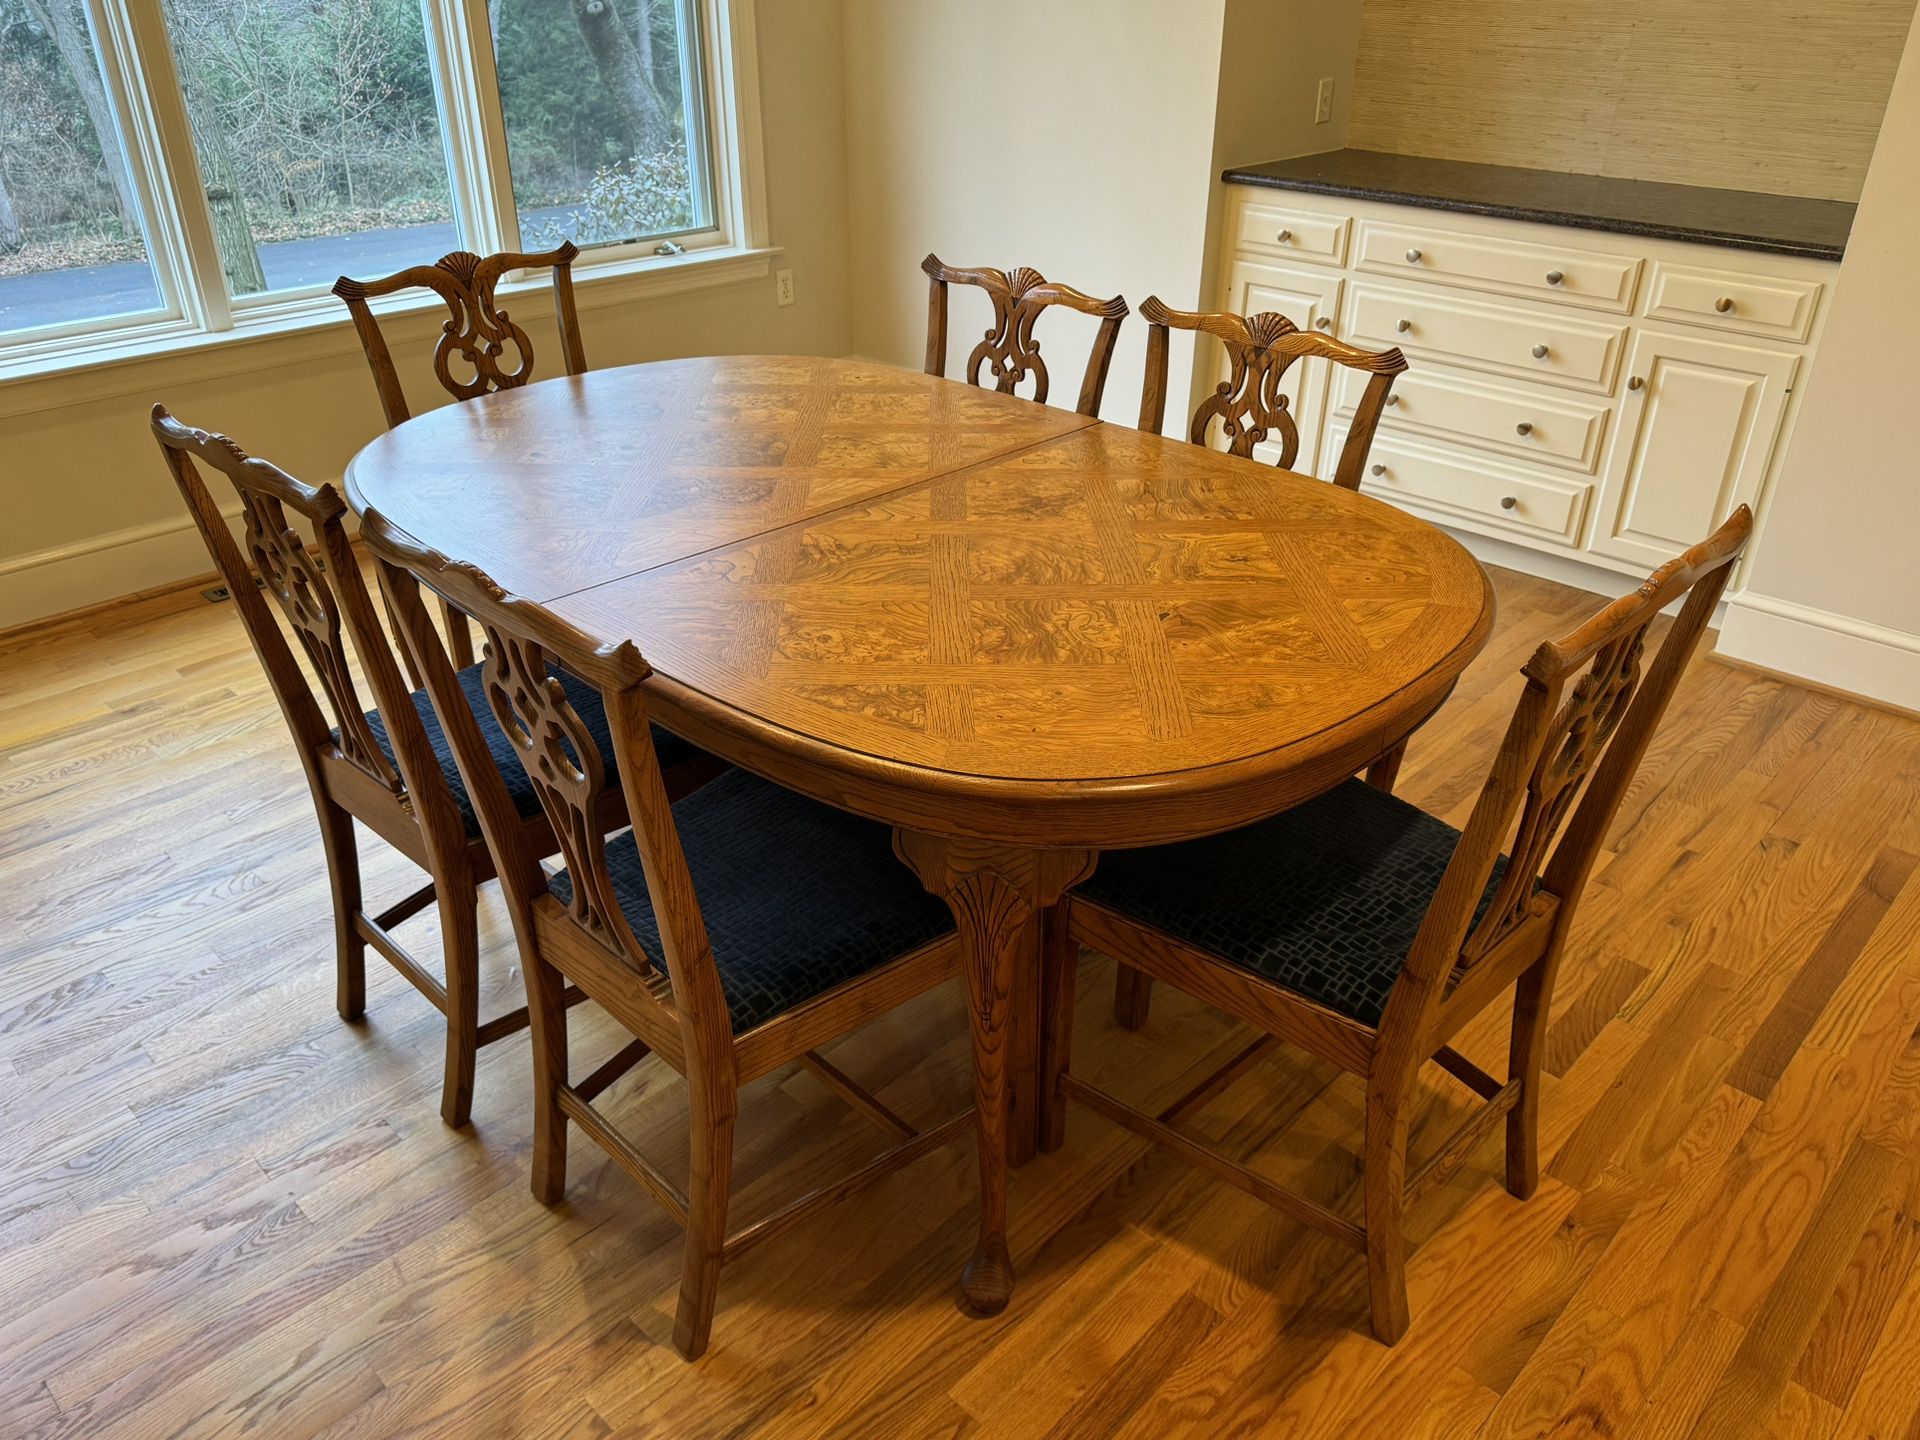 Vintage Dining Table w/ 6 Chairs & 2 Leafs - VG Cond. - Marietta, Pa Pick Up